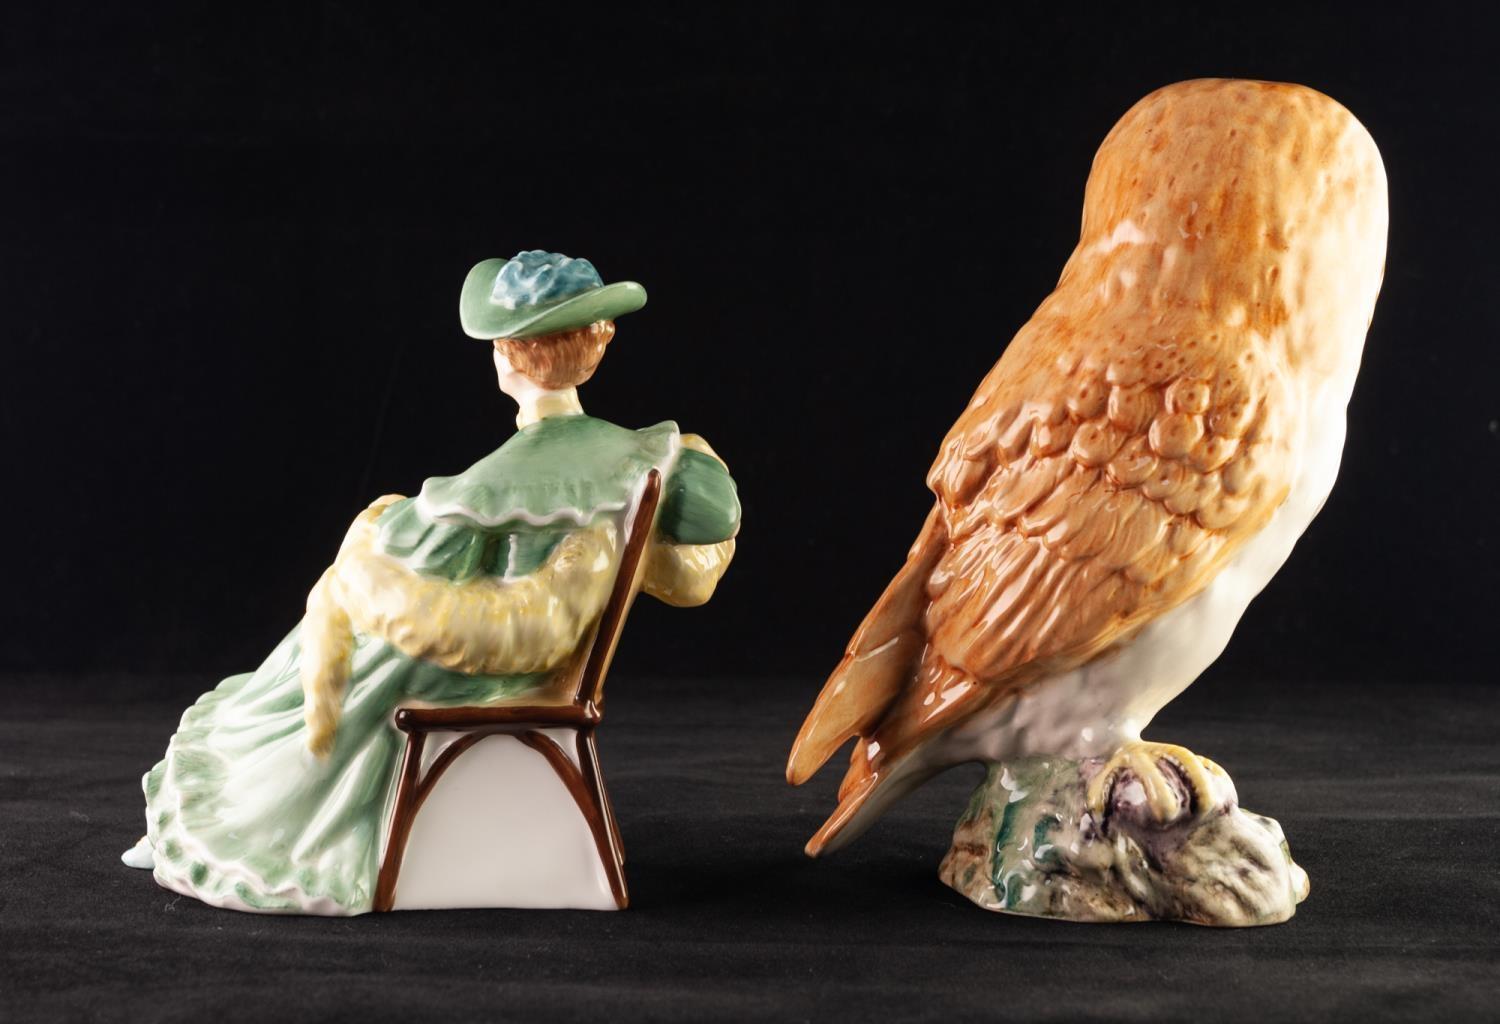 ROYAL DOULTON CHINA FIGURE, ?ASCOT?, HN2356, 6? (15.2cm) high, together with a BESWICK POTTERY MODEL - Image 2 of 2